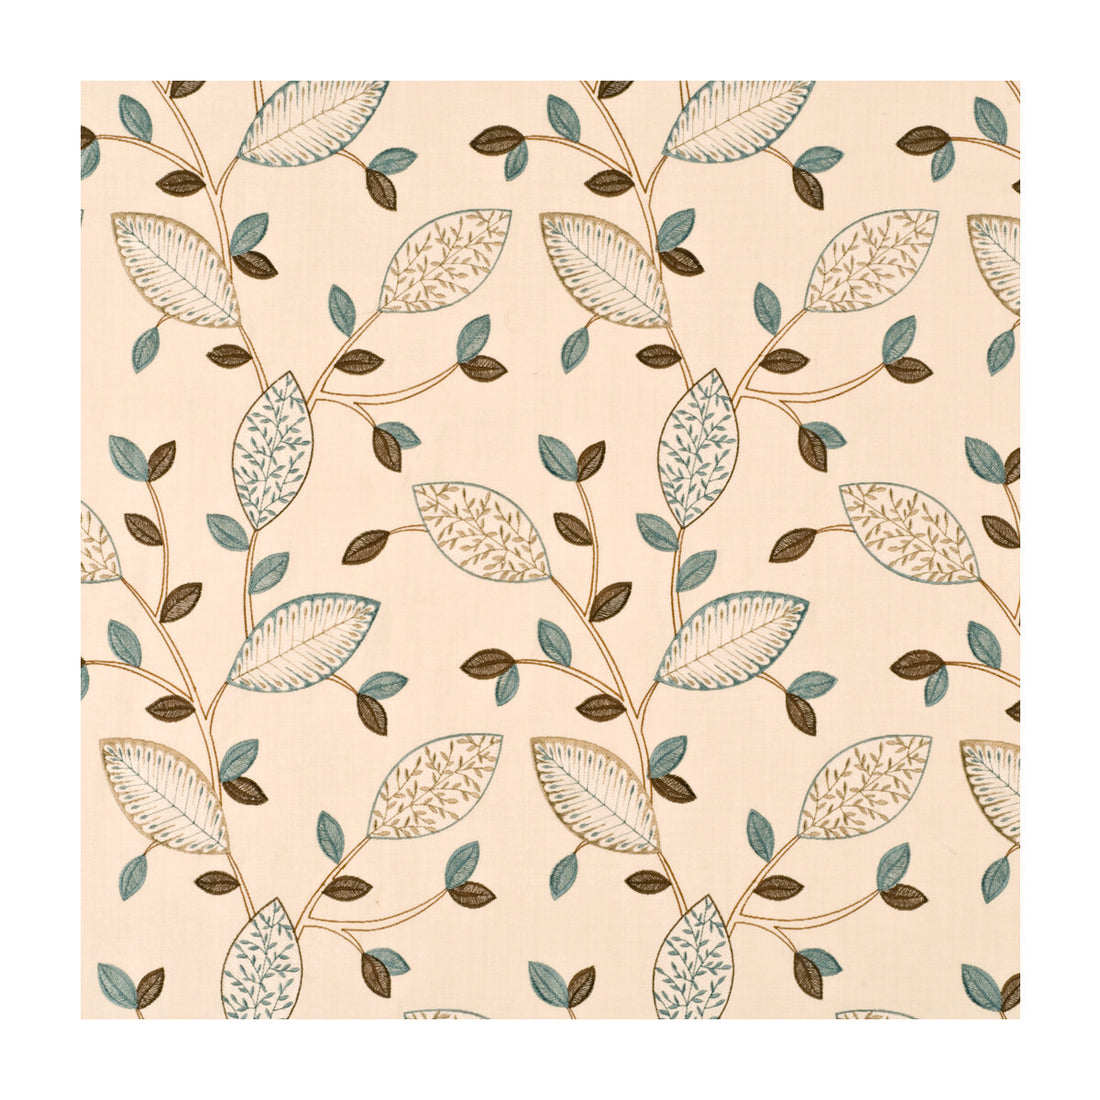 Lauretta fabric in teal/biscuit color - pattern LB50142.3.0 - by Baker Lifestyle in the Country Garden collection